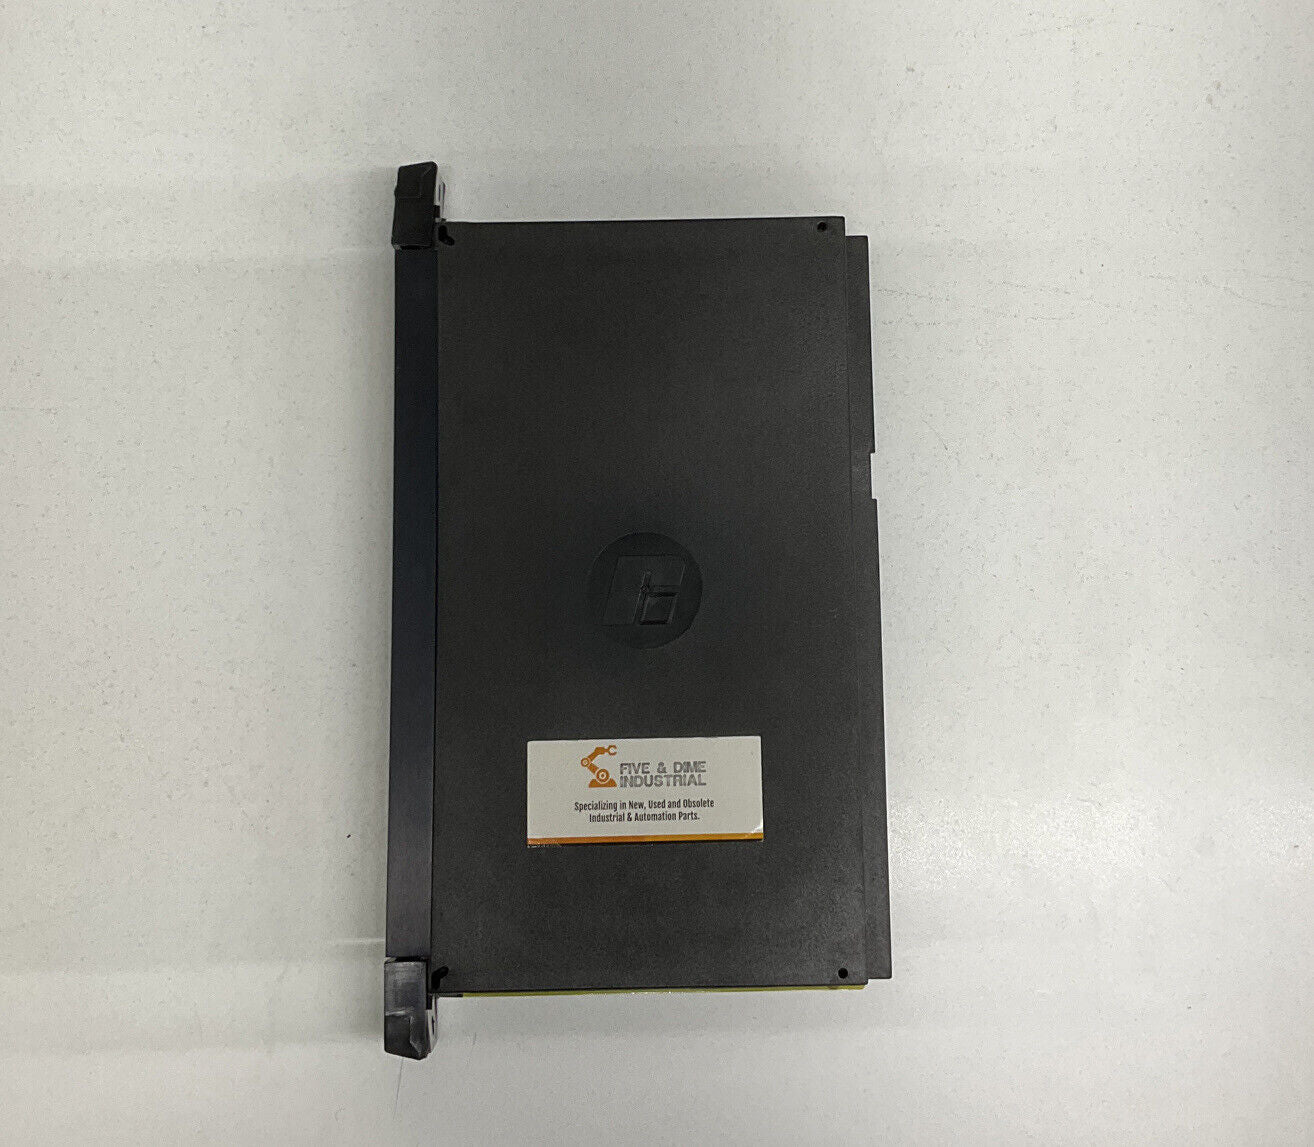 Reliance Electric 57404-1F Distributed Control System J-3609 Module (CB106)